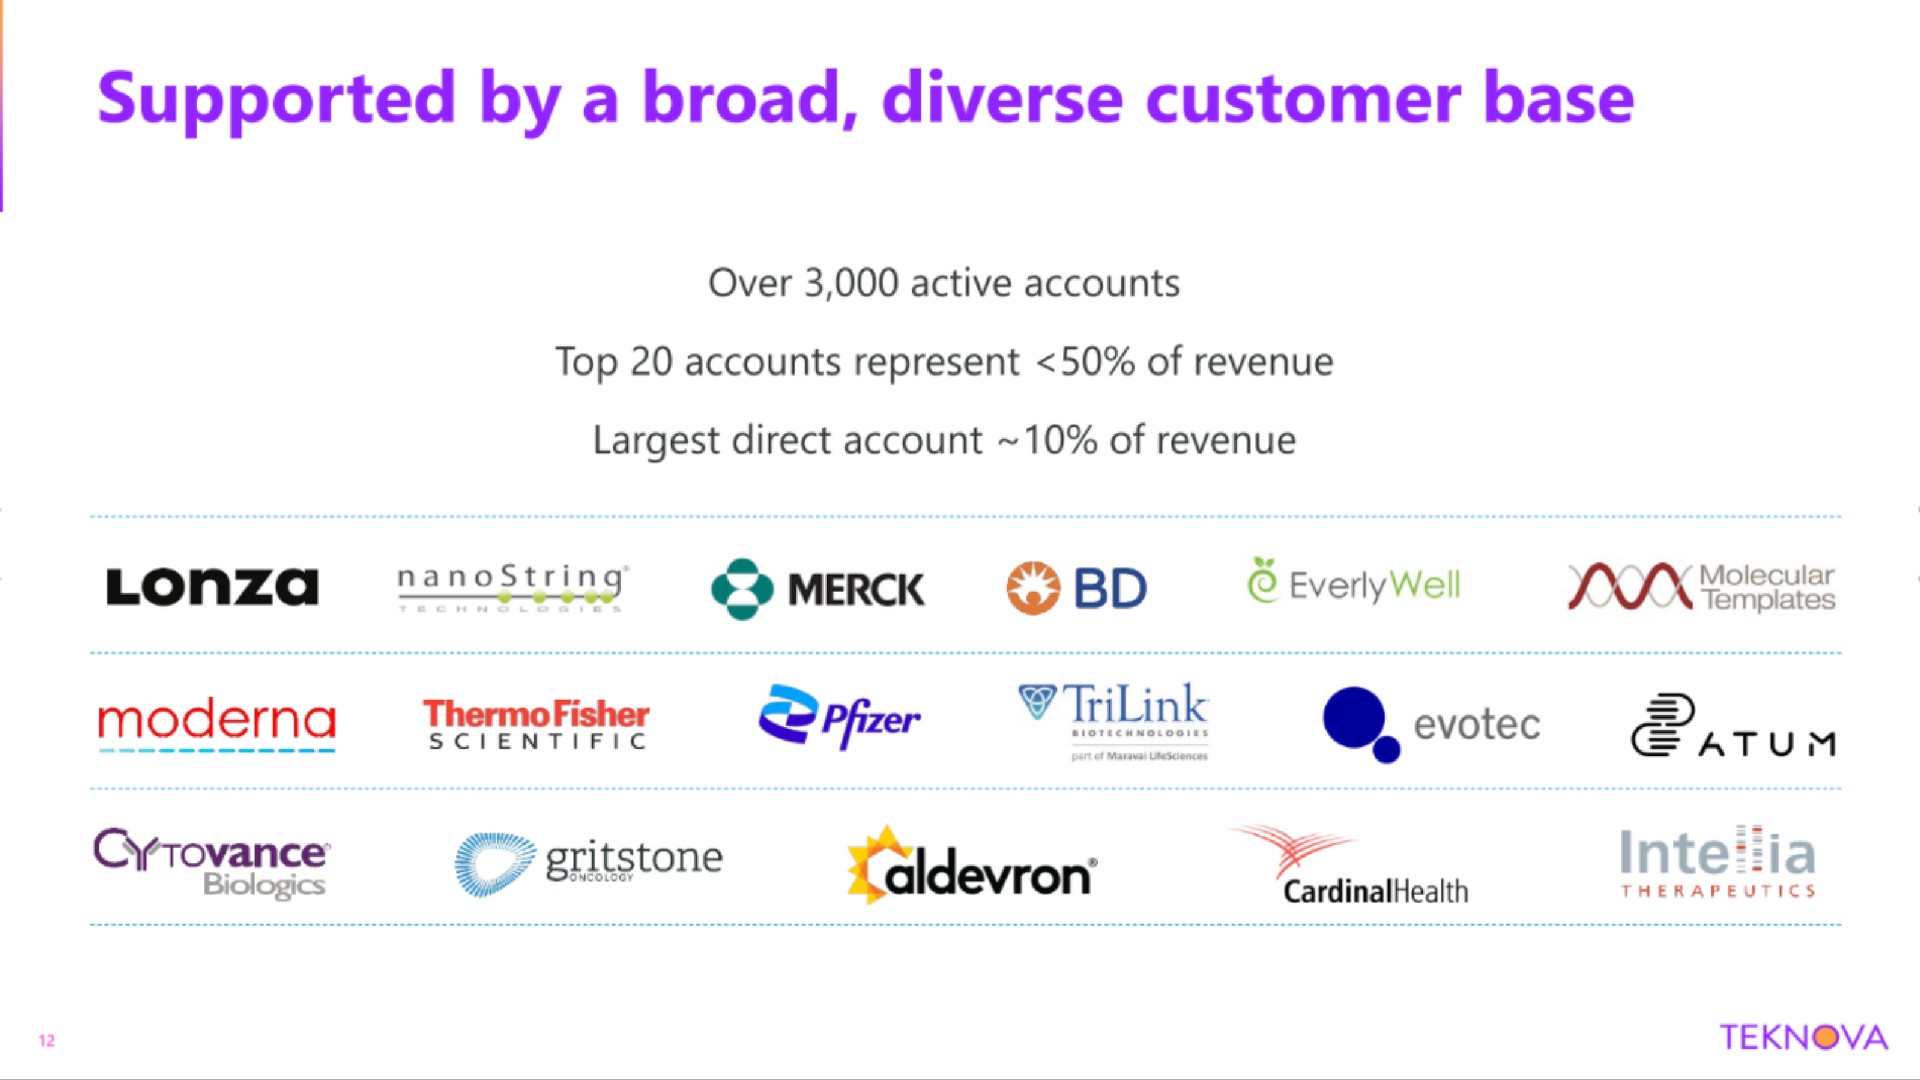 supported by a broad diverse customer base ies | Teknova